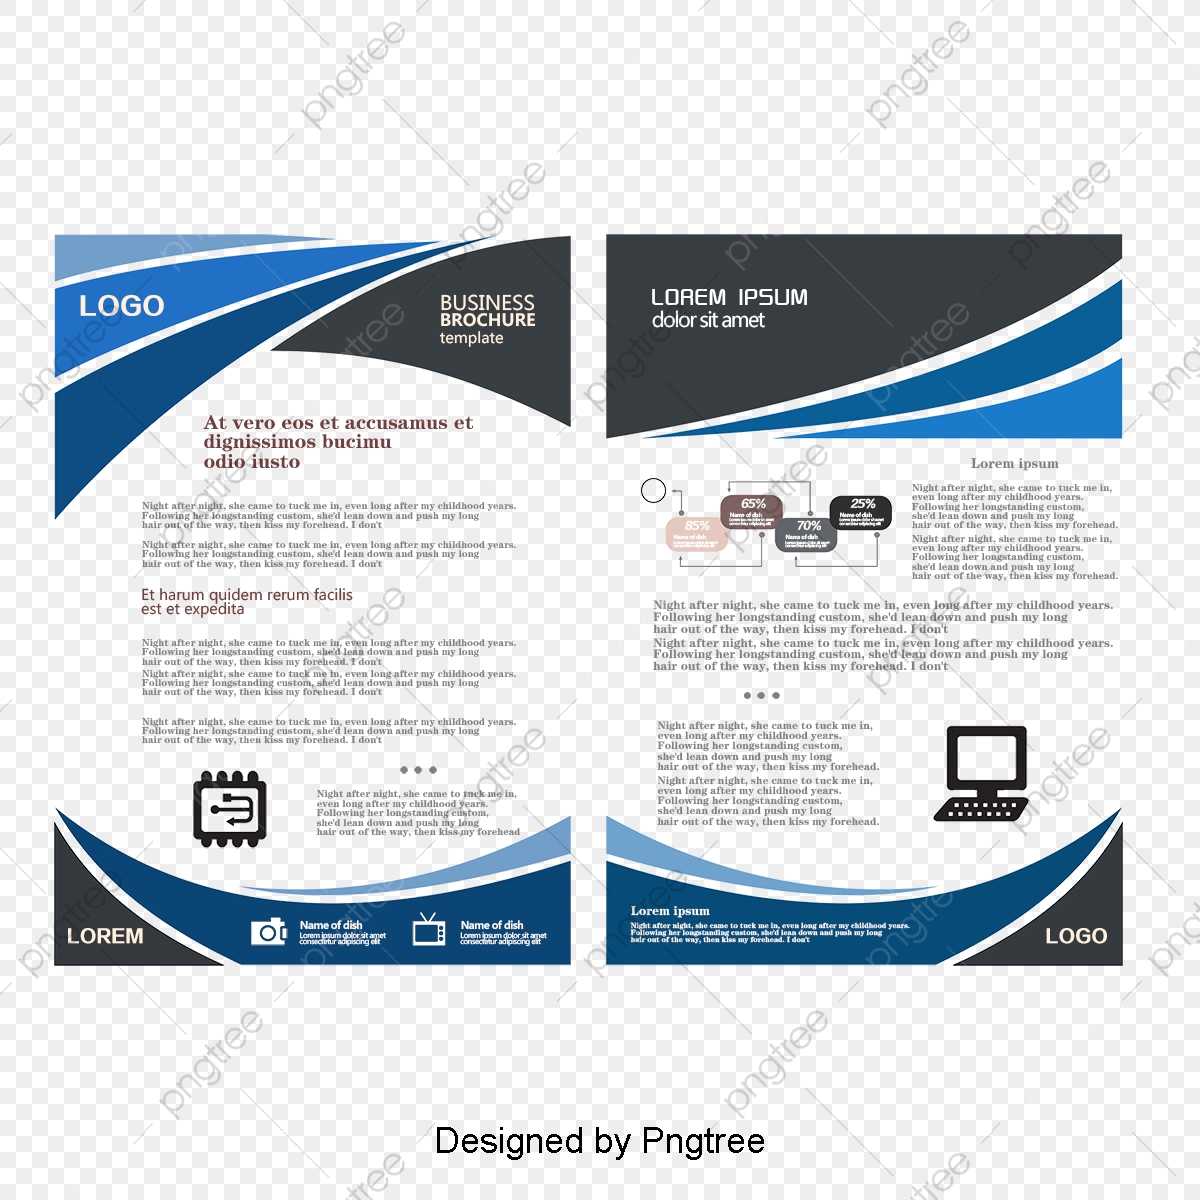 Fashion Business Single Page, One Page Brochure, Fashion Throughout One Page Brochure Template